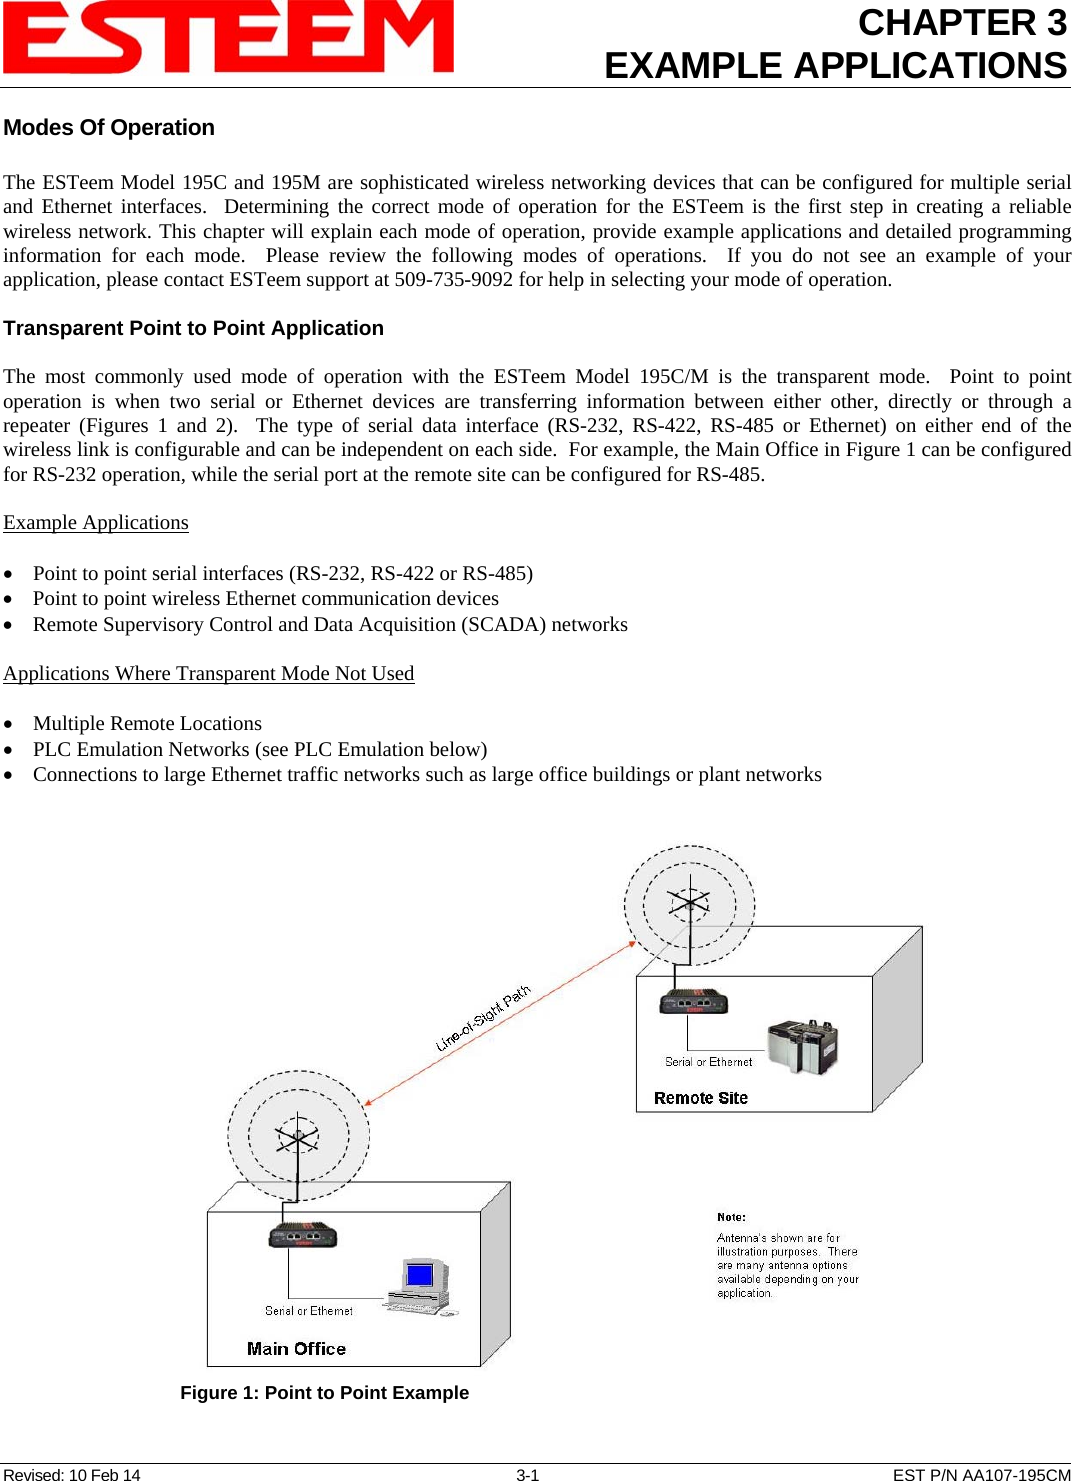 CHAPTER 3 EXAMPLE APPLICATIONS  Modes Of Operation  The ESTeem Model 195C and 195M are sophisticated wireless networking devices that can be configured for multiple serial and Ethernet interfaces.  Determining the correct mode of operation for the ESTeem is the first step in creating a reliable wireless network. This chapter will explain each mode of operation, provide example applications and detailed programming information for each mode.  Please review the following modes of operations.  If you do not see an example of your application, please contact ESTeem support at 509-735-9092 for help in selecting your mode of operation.  Transparent Point to Point Application  The most commonly used mode of operation with the ESTeem Model 195C/M is the transparent mode.  Point to point operation is when two serial or Ethernet devices are transferring information between either other, directly or through a repeater (Figures 1 and 2).  The type of serial data interface (RS-232, RS-422, RS-485 or Ethernet) on either end of the wireless link is configurable and can be independent on each side.  For example, the Main Office in Figure 1 can be configured for RS-232 operation, while the serial port at the remote site can be configured for RS-485.  Example Applications   Point to point serial interfaces (RS-232, RS-422 or RS-485)  Point to point wireless Ethernet communication devices  Remote Supervisory Control and Data Acquisition (SCADA) networks  Applications Where Transparent Mode Not Used   Multiple Remote Locations  PLC Emulation Networks (see PLC Emulation below)  Connections to large Ethernet traffic networks such as large office buildings or plant networks   Figure 1: Point to Point Example Revised: 10 Feb 14  3-1  EST P/N AA107-195CM 